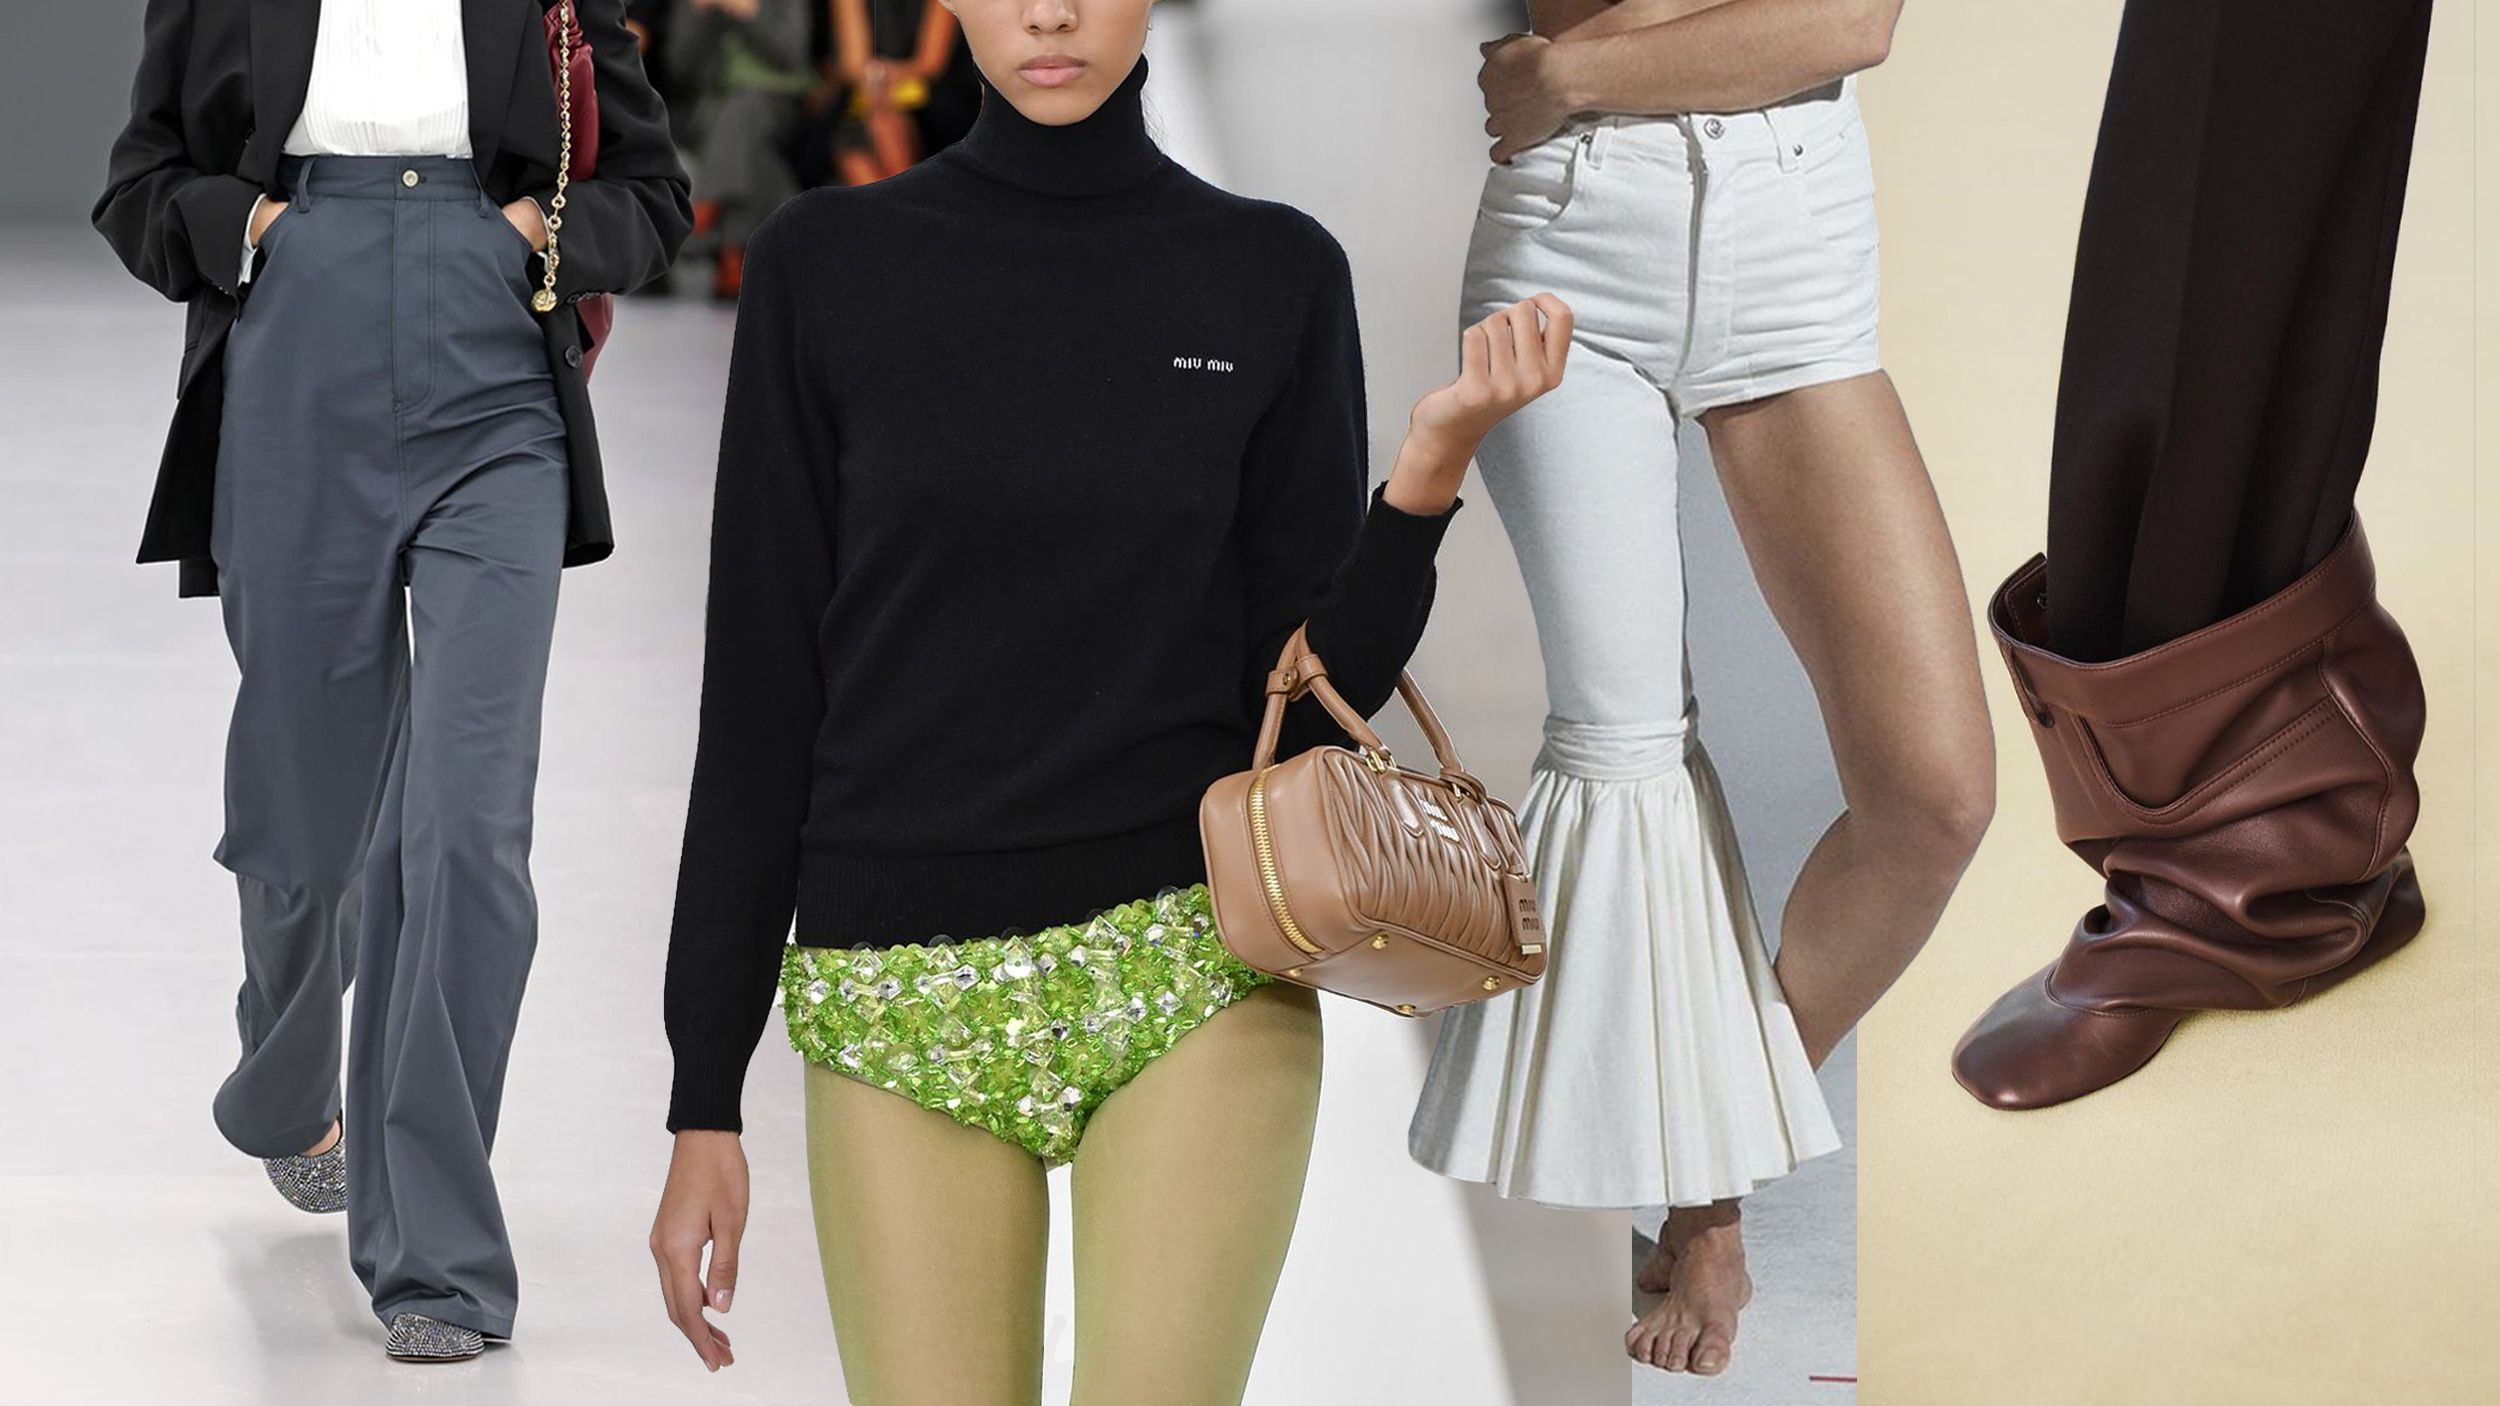 This Is Not a Drill: The Pantless Trend Really Is Happening